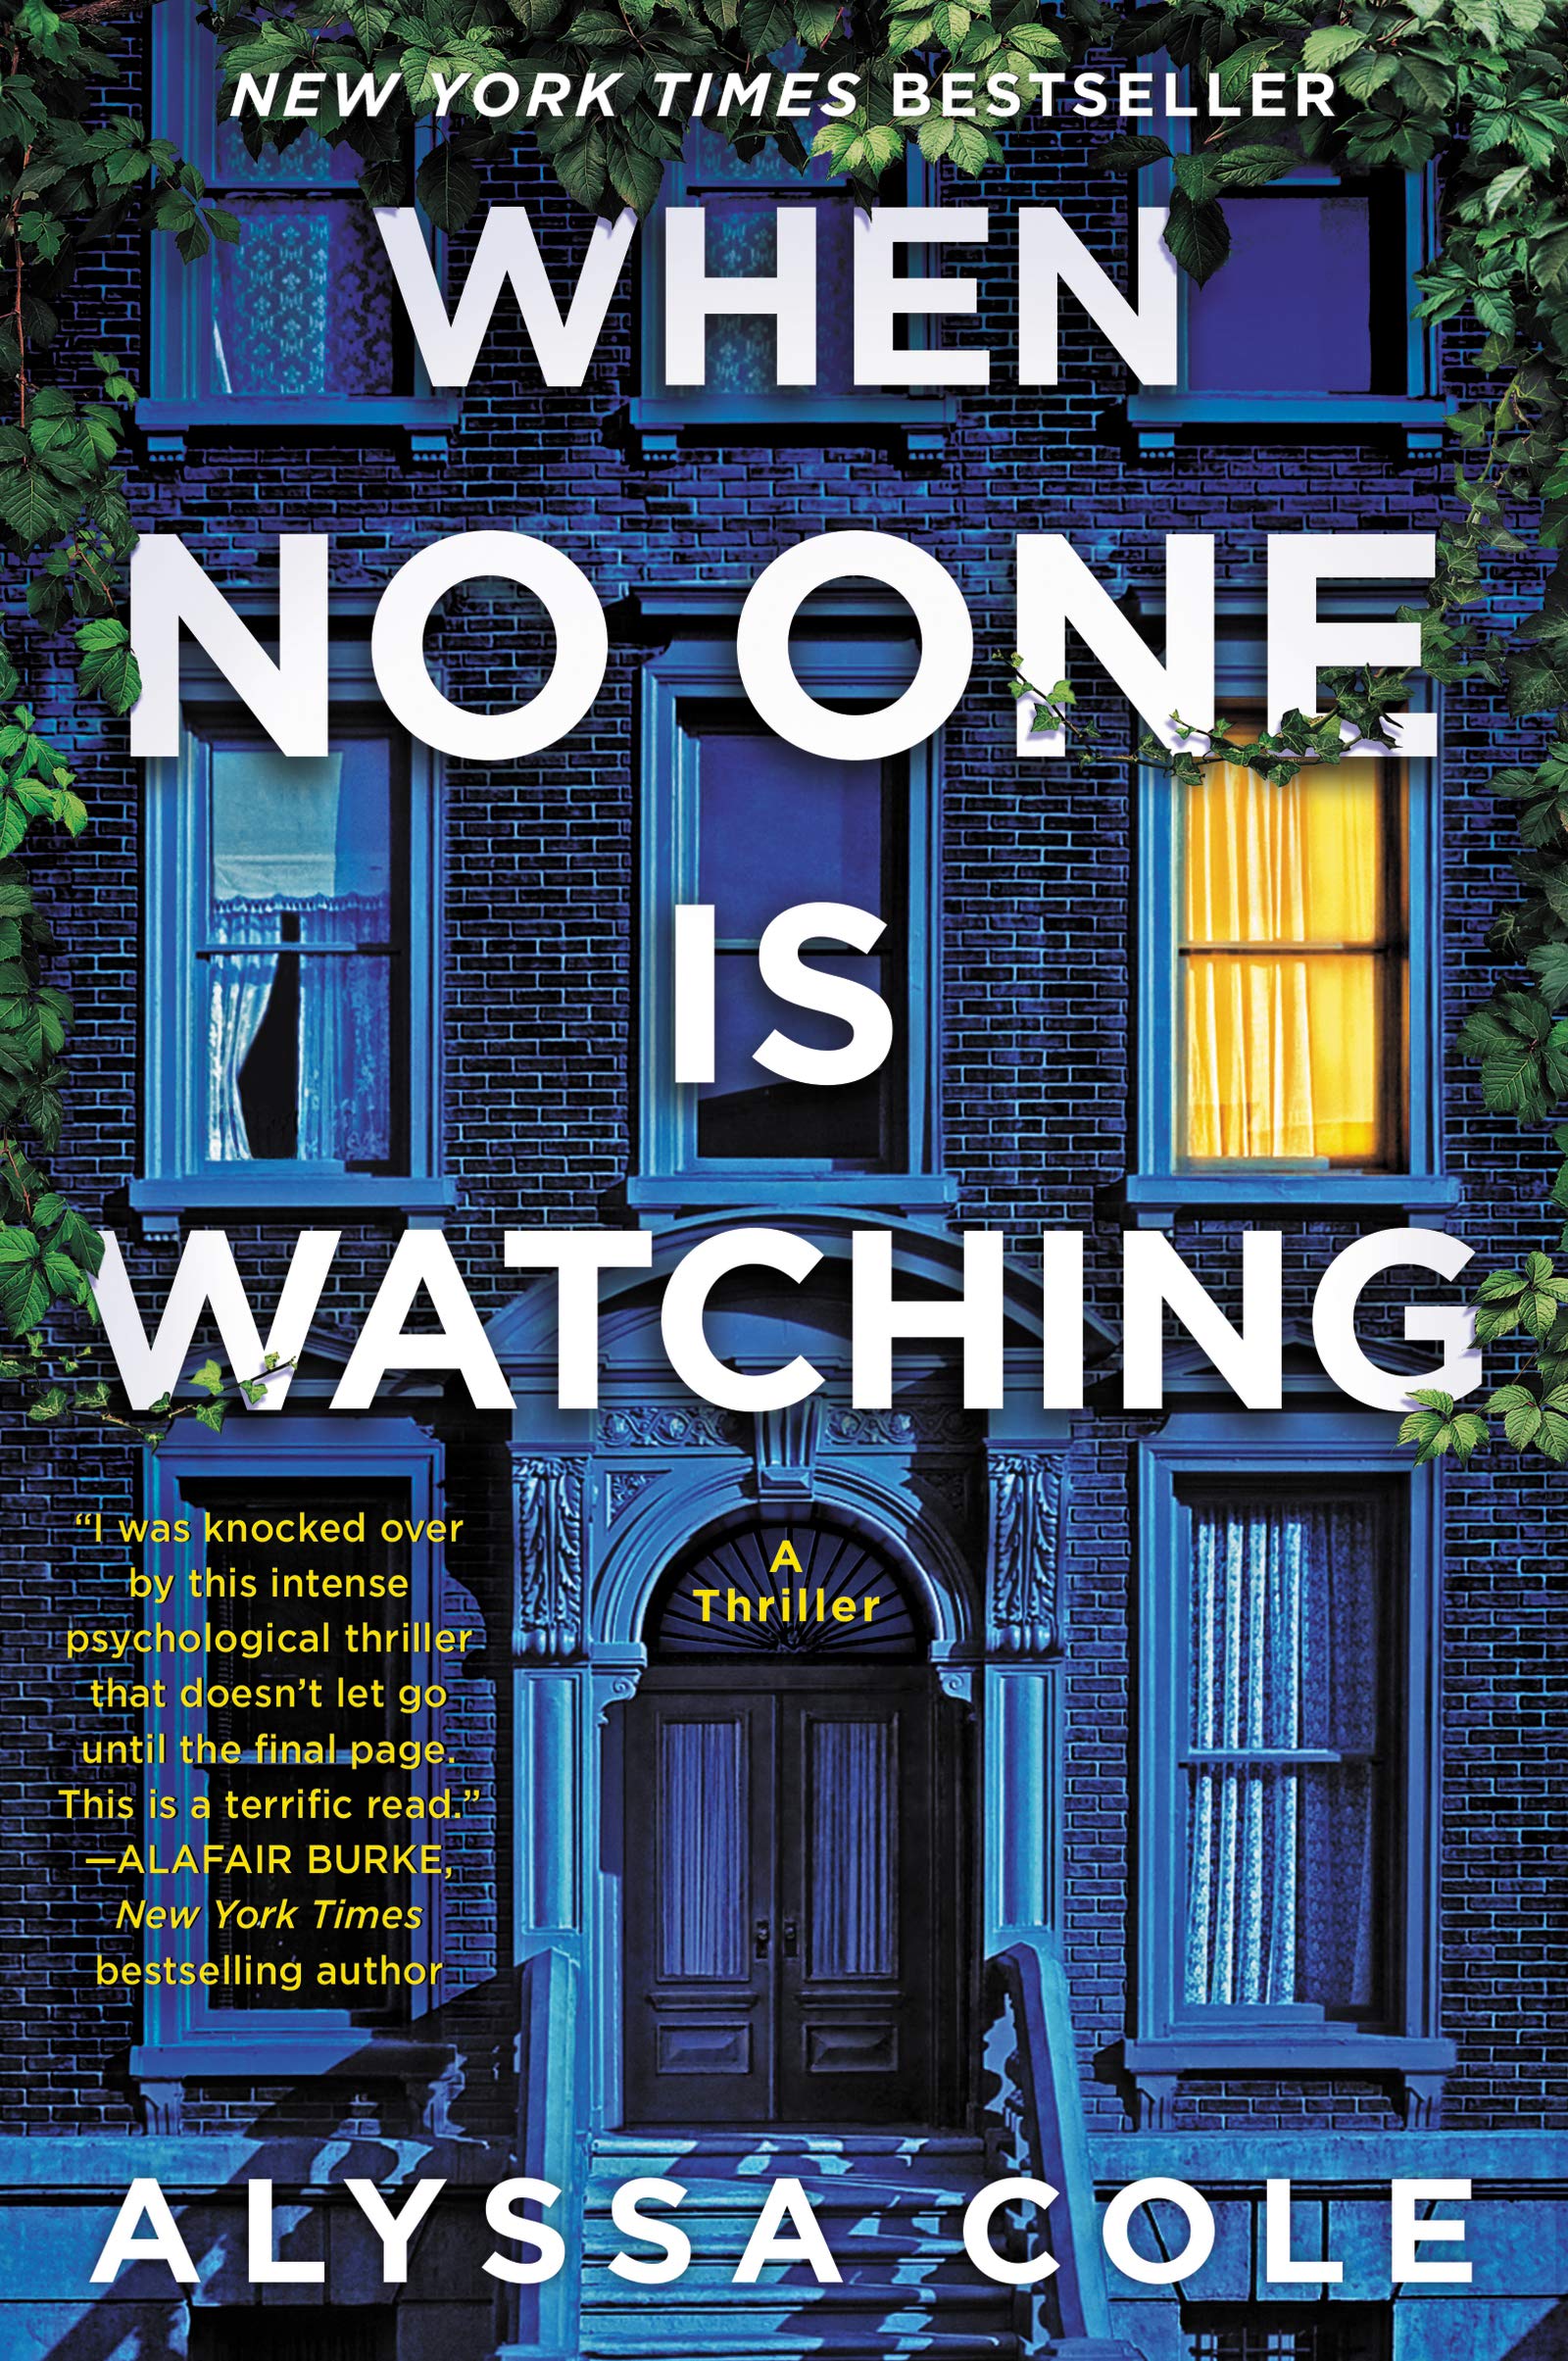 Image for "When No One Is Watching"